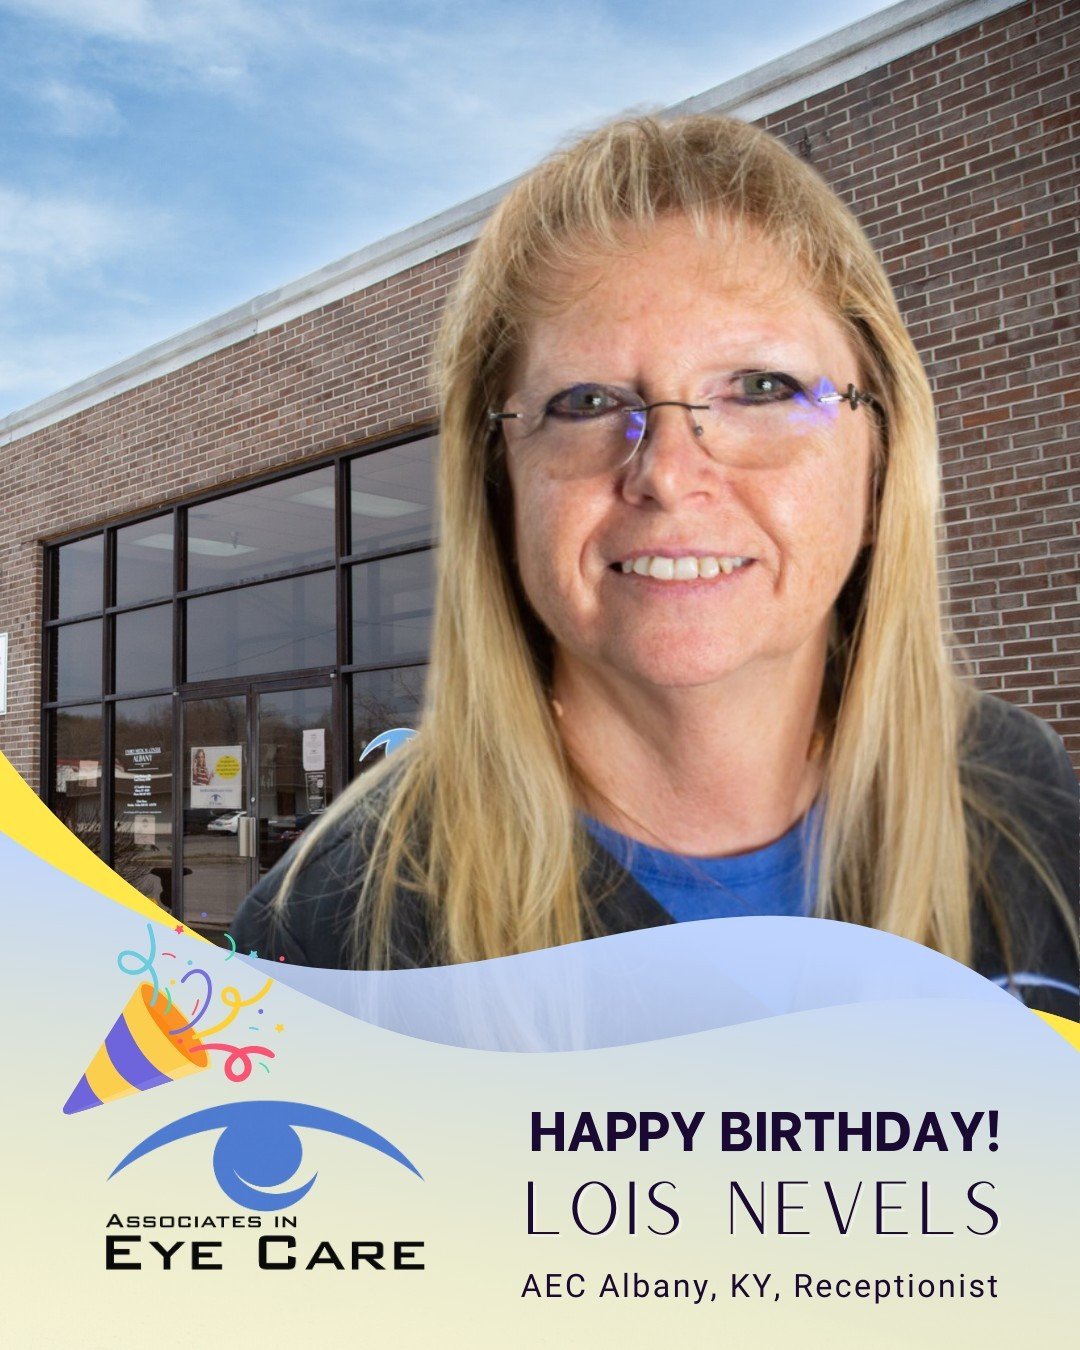 Happy Birthday to our Receptionist Lois Nevels at AEC Albany, KY! We hope you have a wonderful day! 🎂🎈 #albanyky #associatesineyecare #seemuchbetter